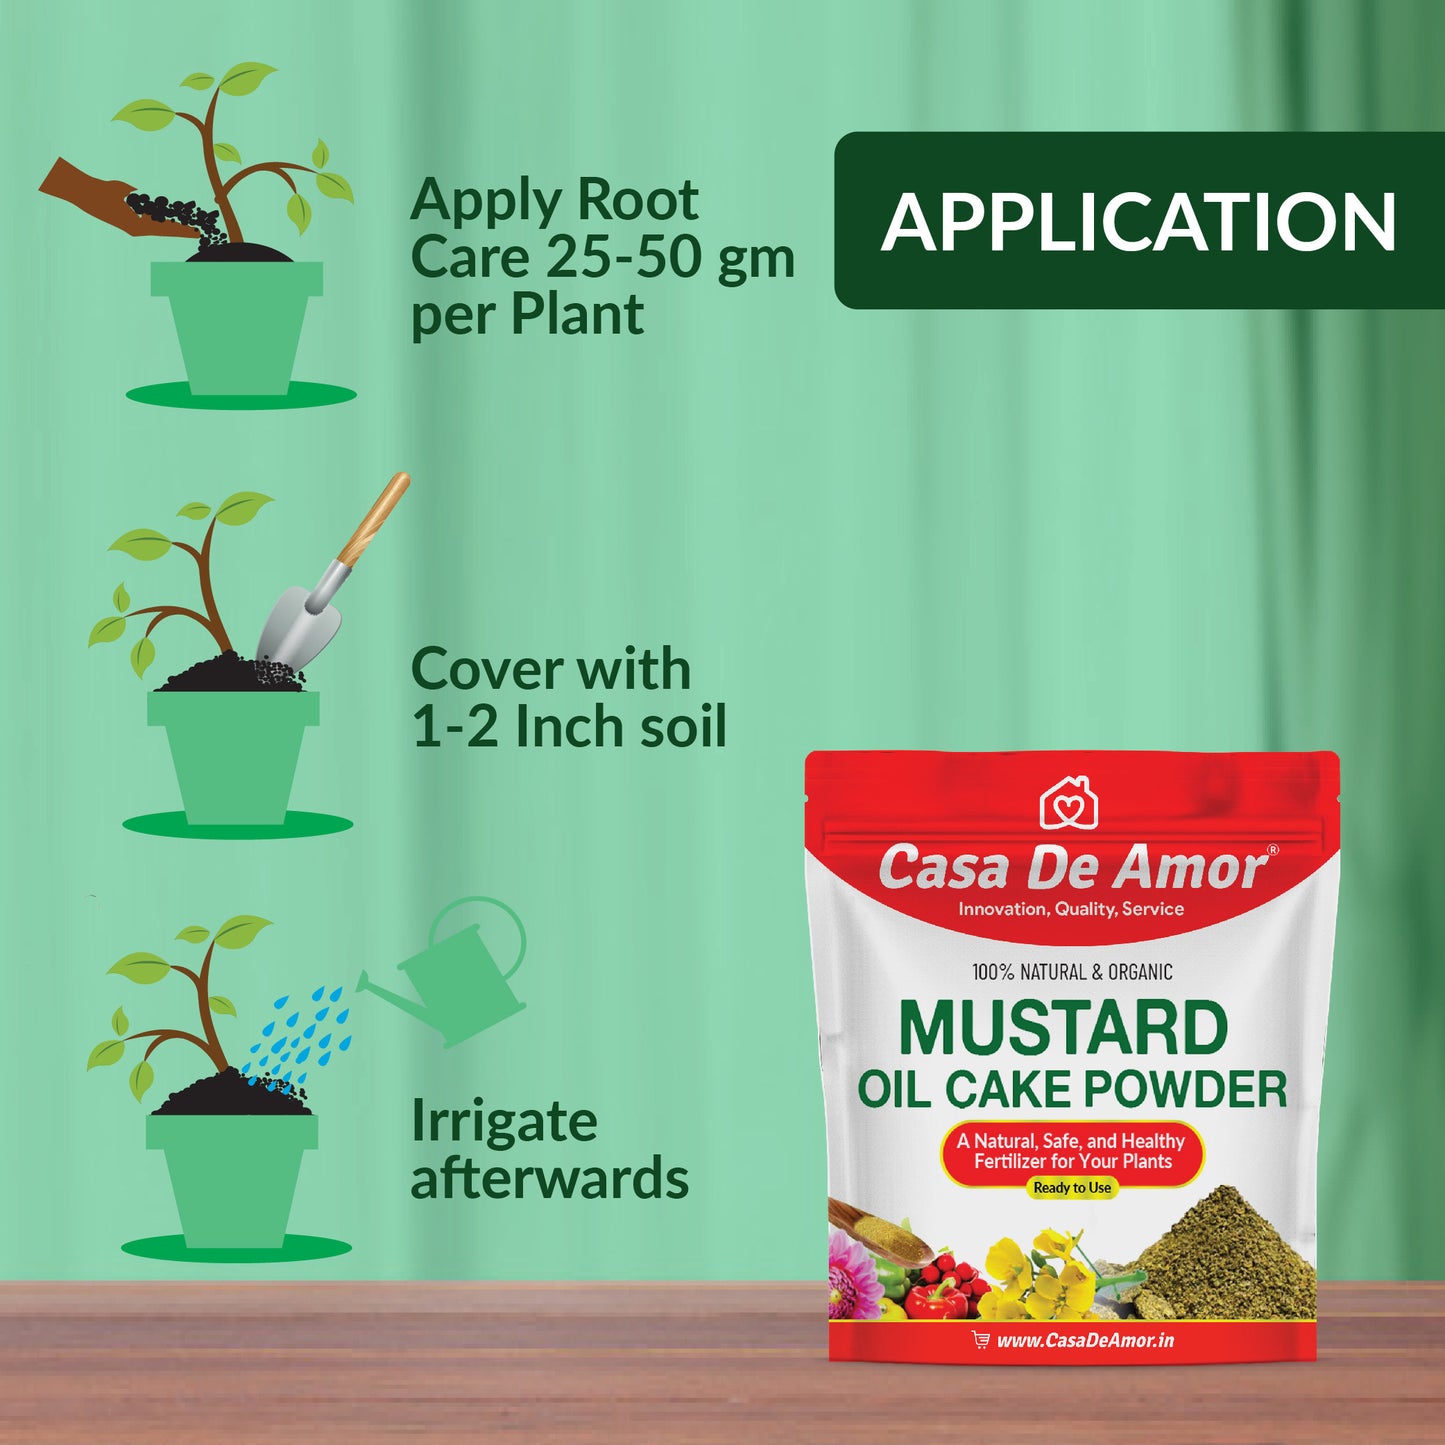 Mustard Oil Cake Powder Natural Safe Ecofriendly Fertilizer for Plant Growth and Healthy Roots